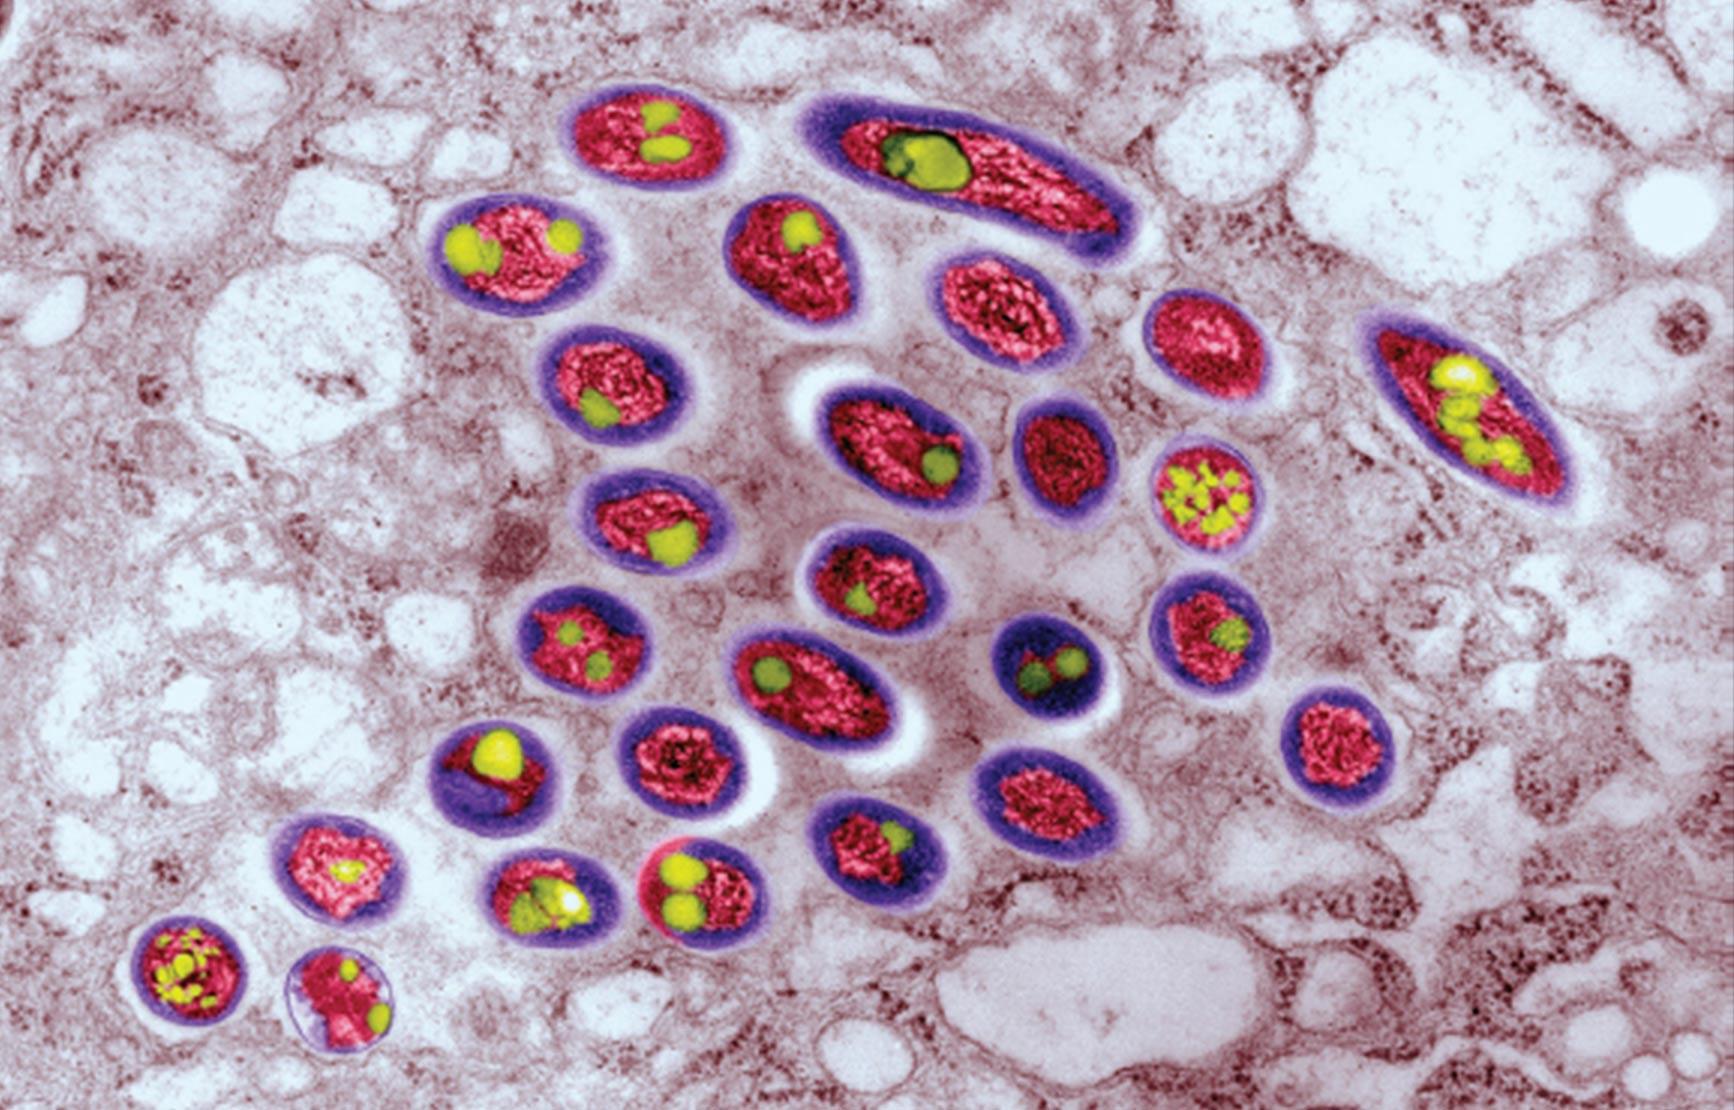 A microscopic image of fluorescently colored mycobacteria.